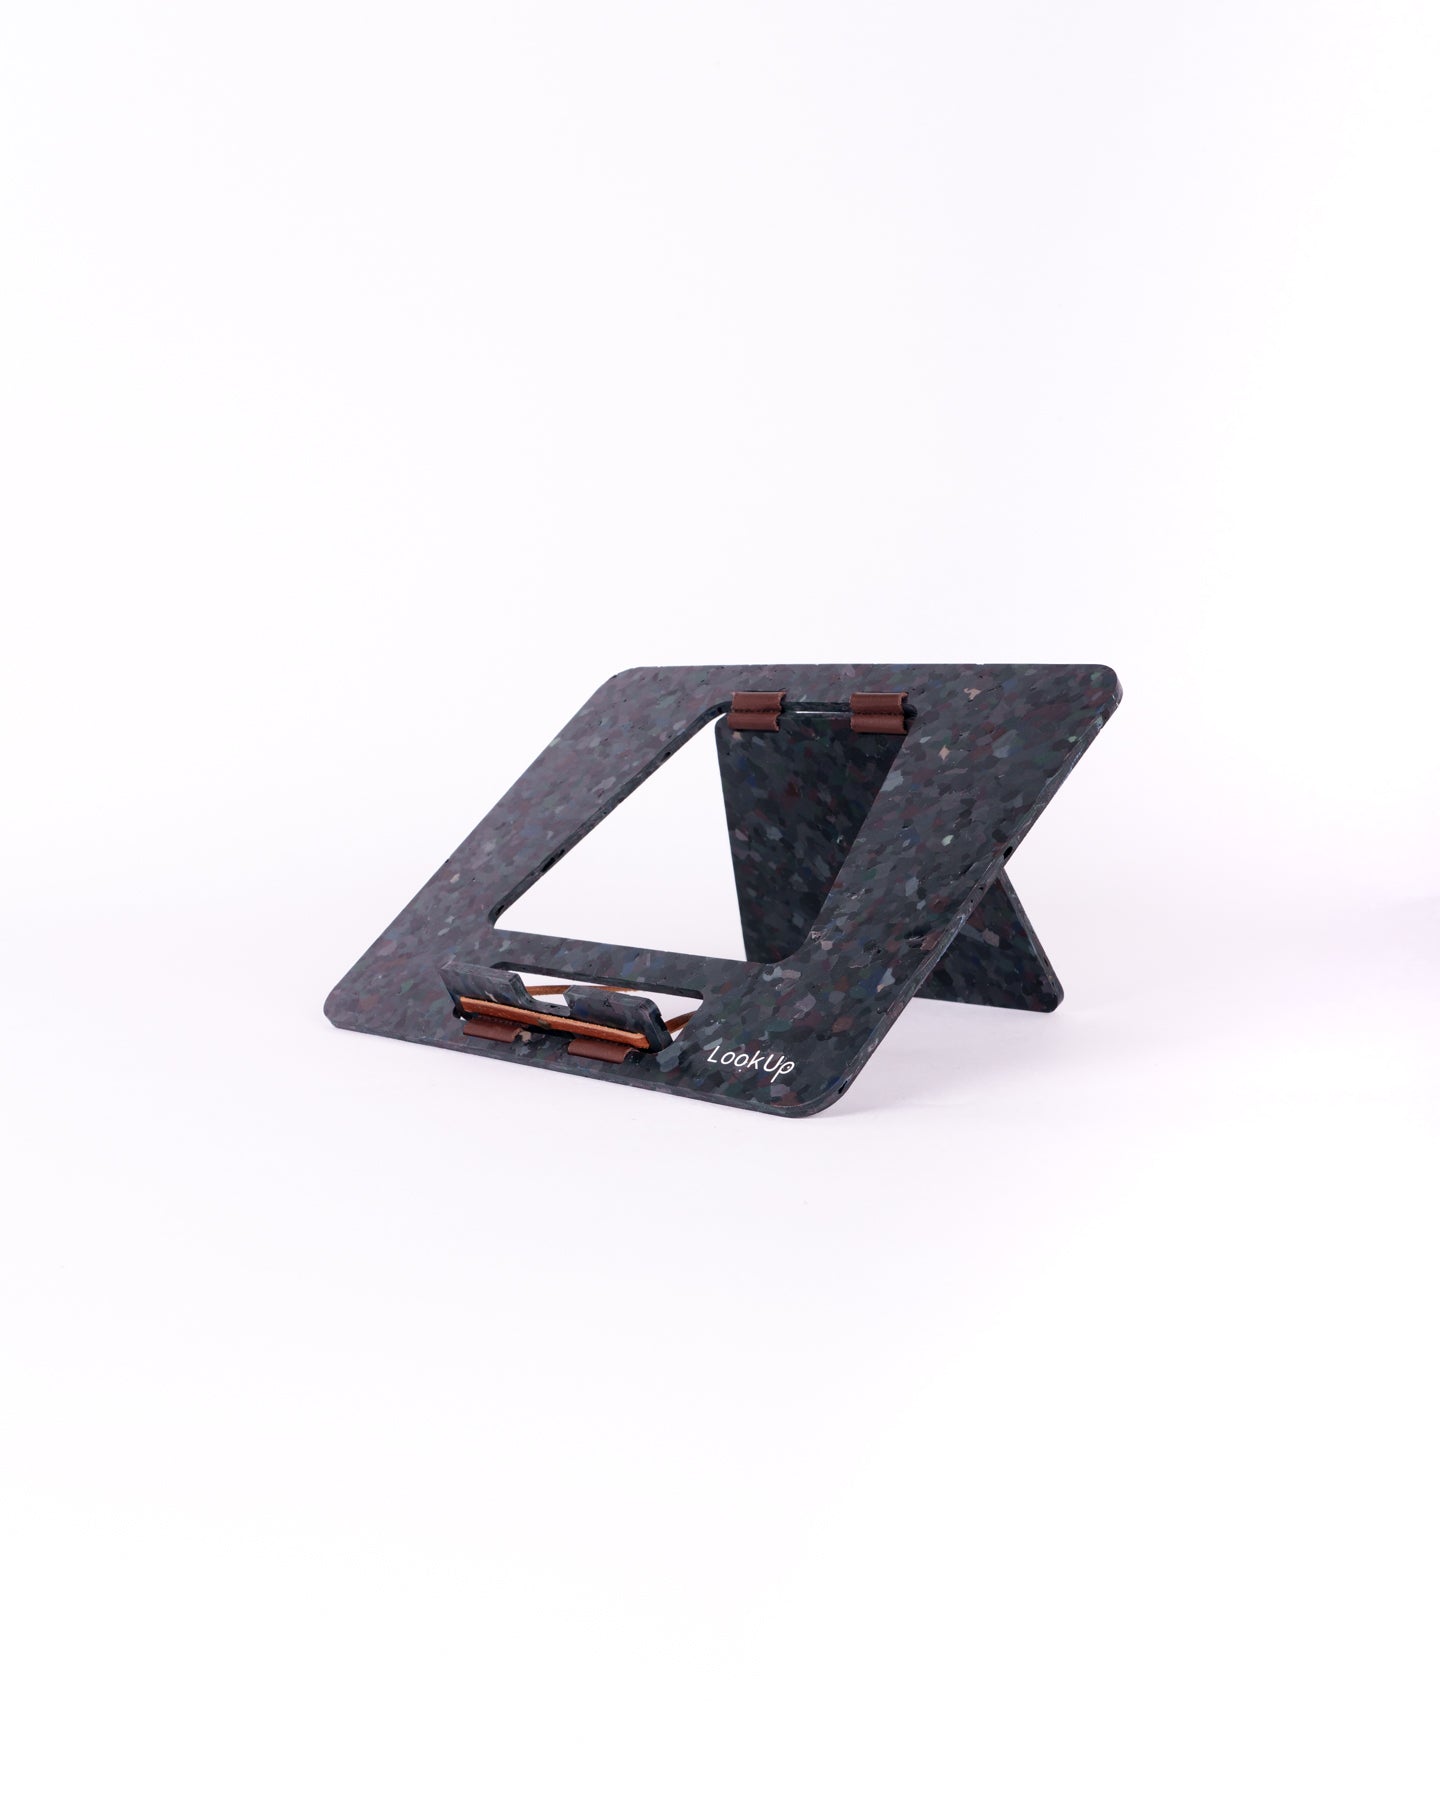 Recycled plastic computer stand